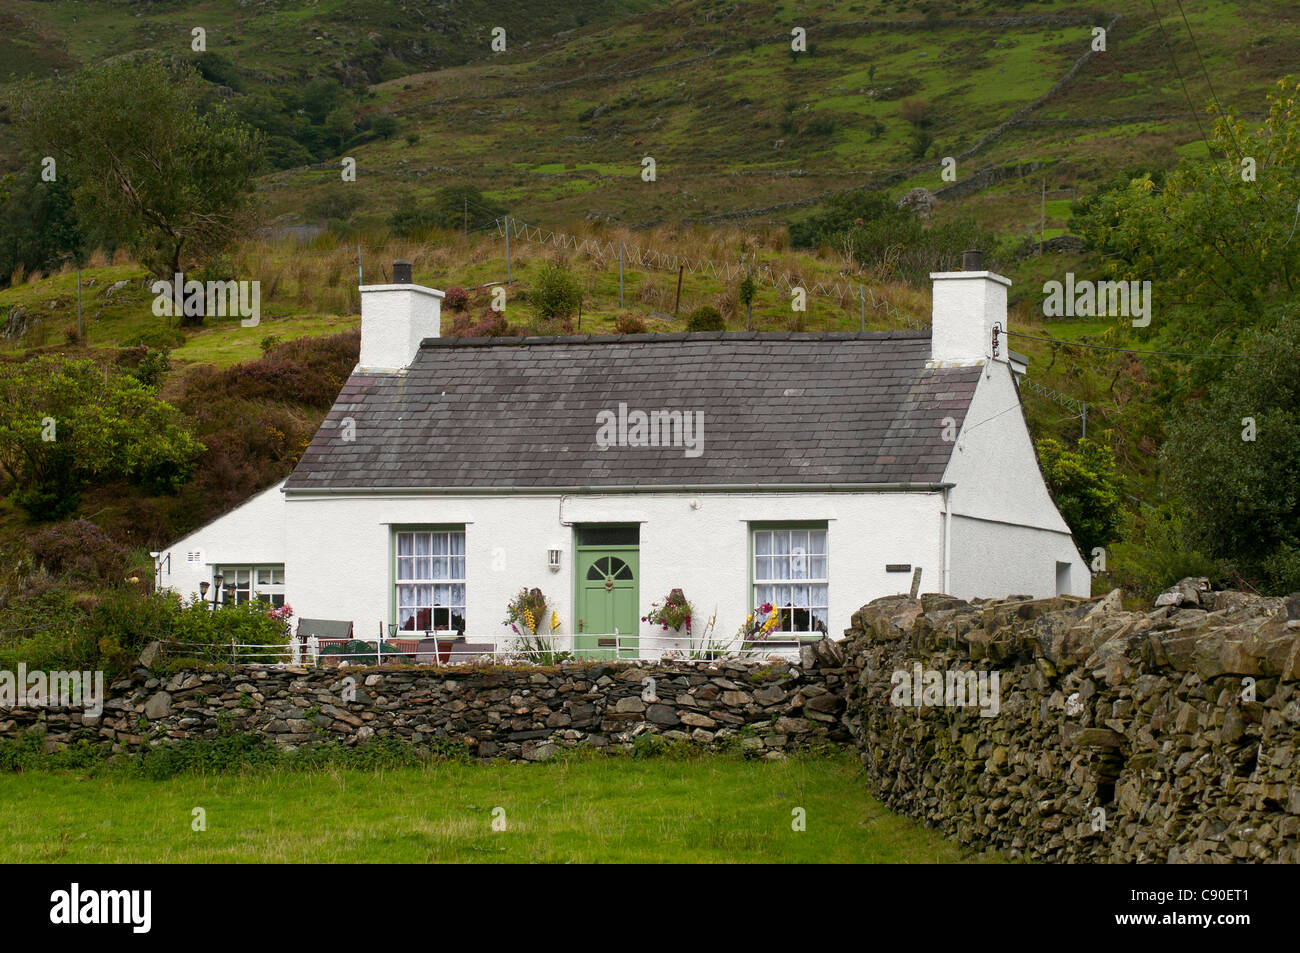 Cottage in the village of Nant Pertis near Llanberris, Snowdonia National Park, Wales, UK Stock Photo